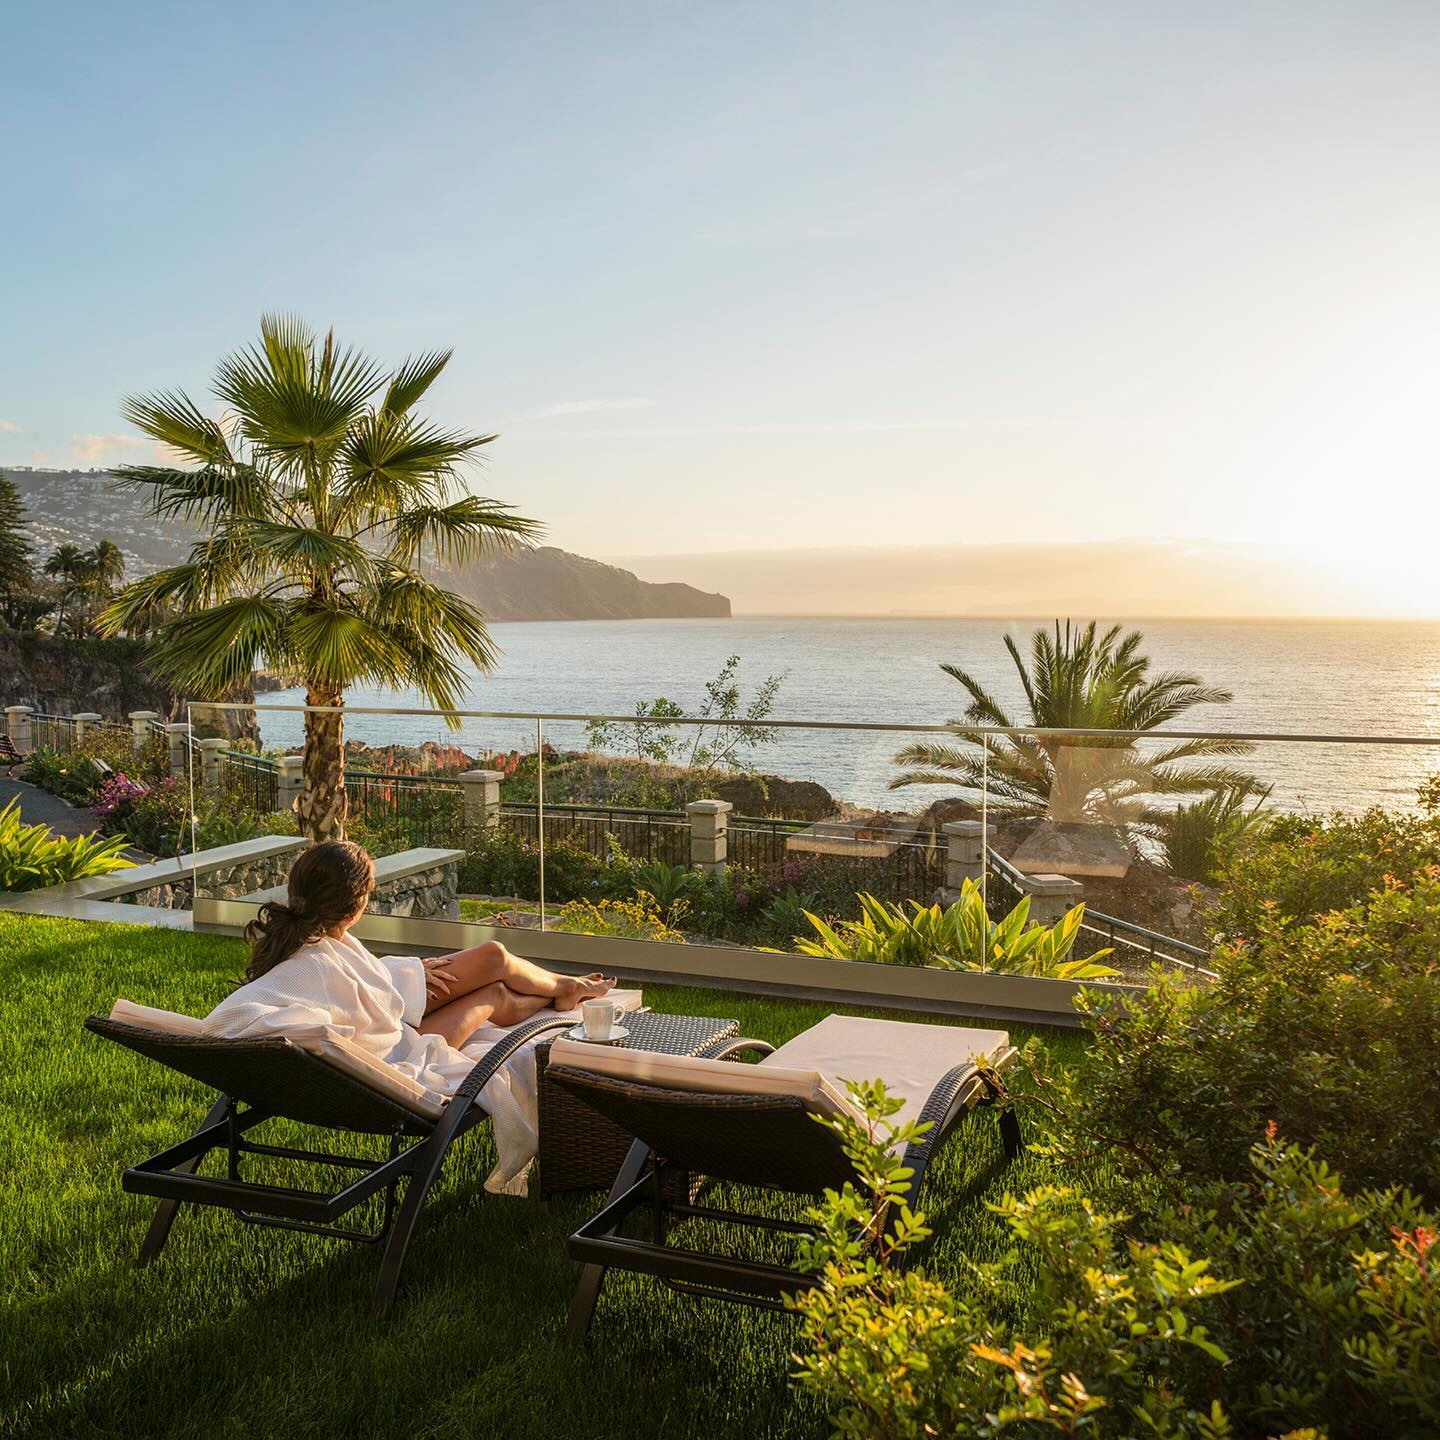 Top 7 Honeymoon Destinations in Portugal You Need To Know About